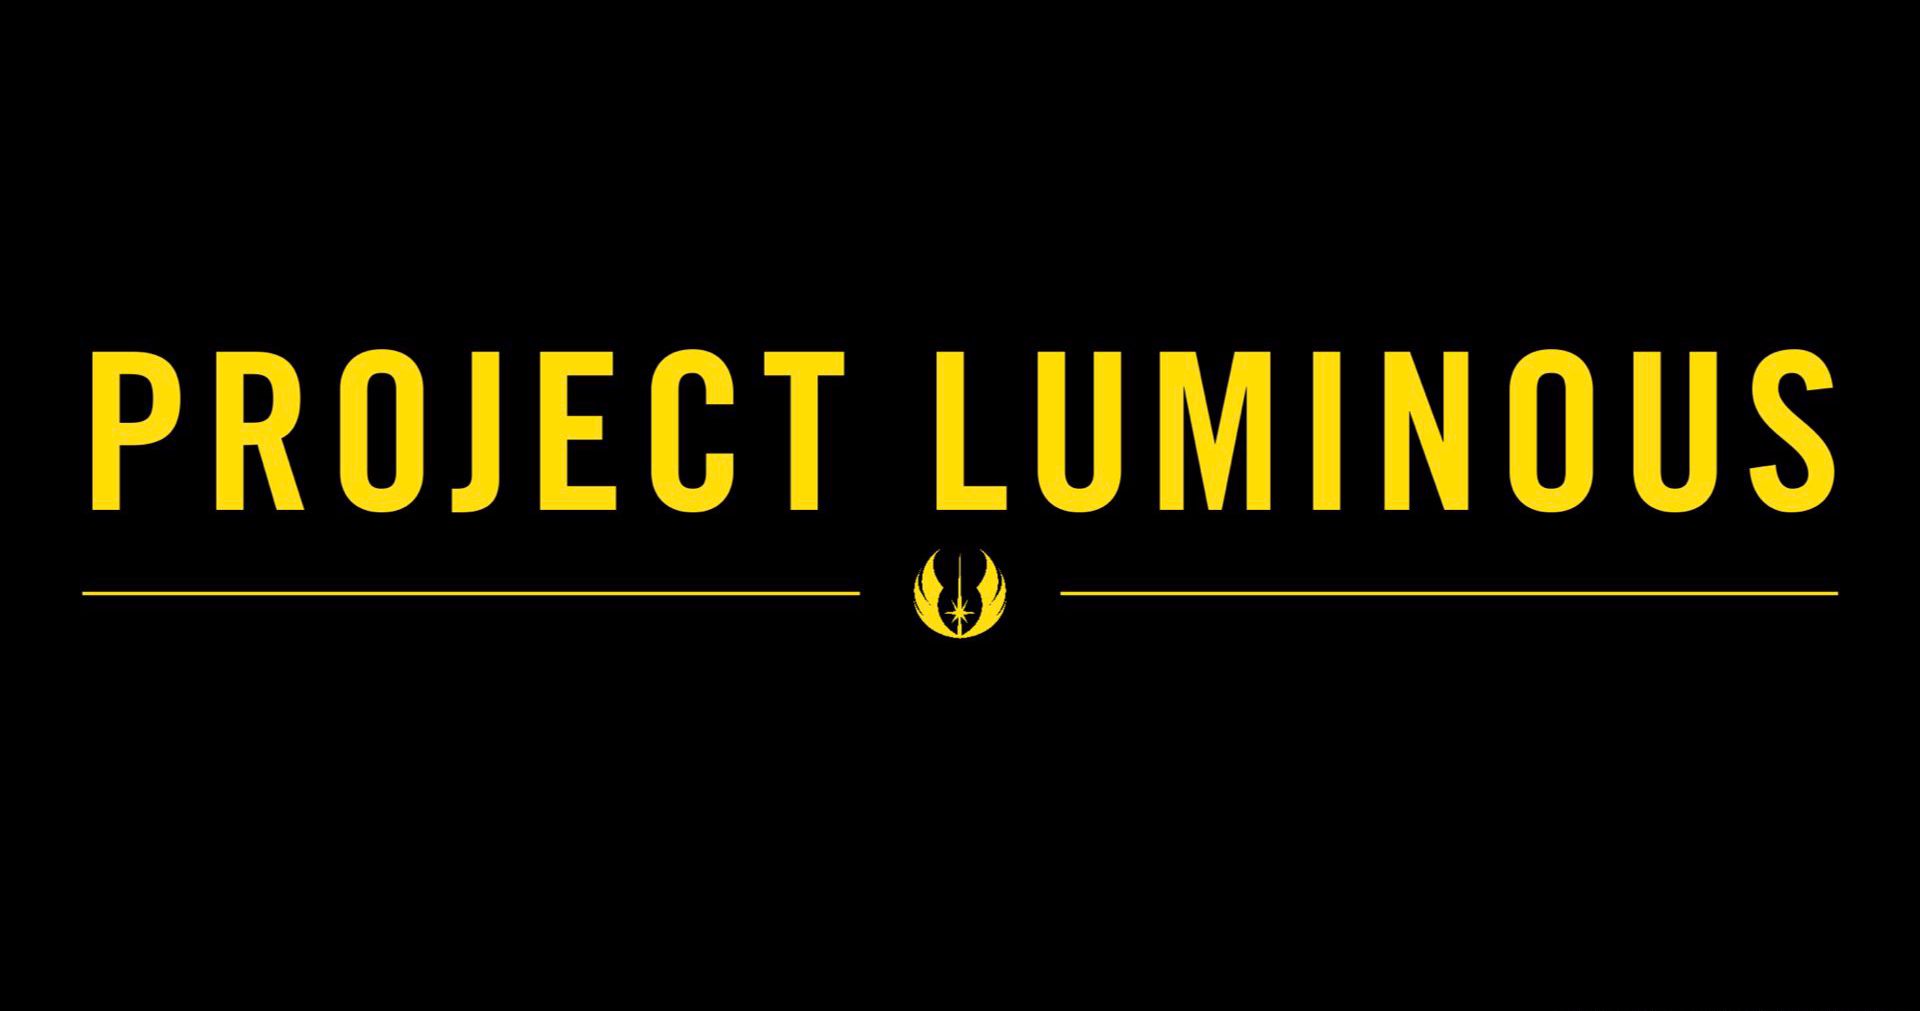 Mysterious Star Wars: Project Luminous Details Will Be Revealed Tonight